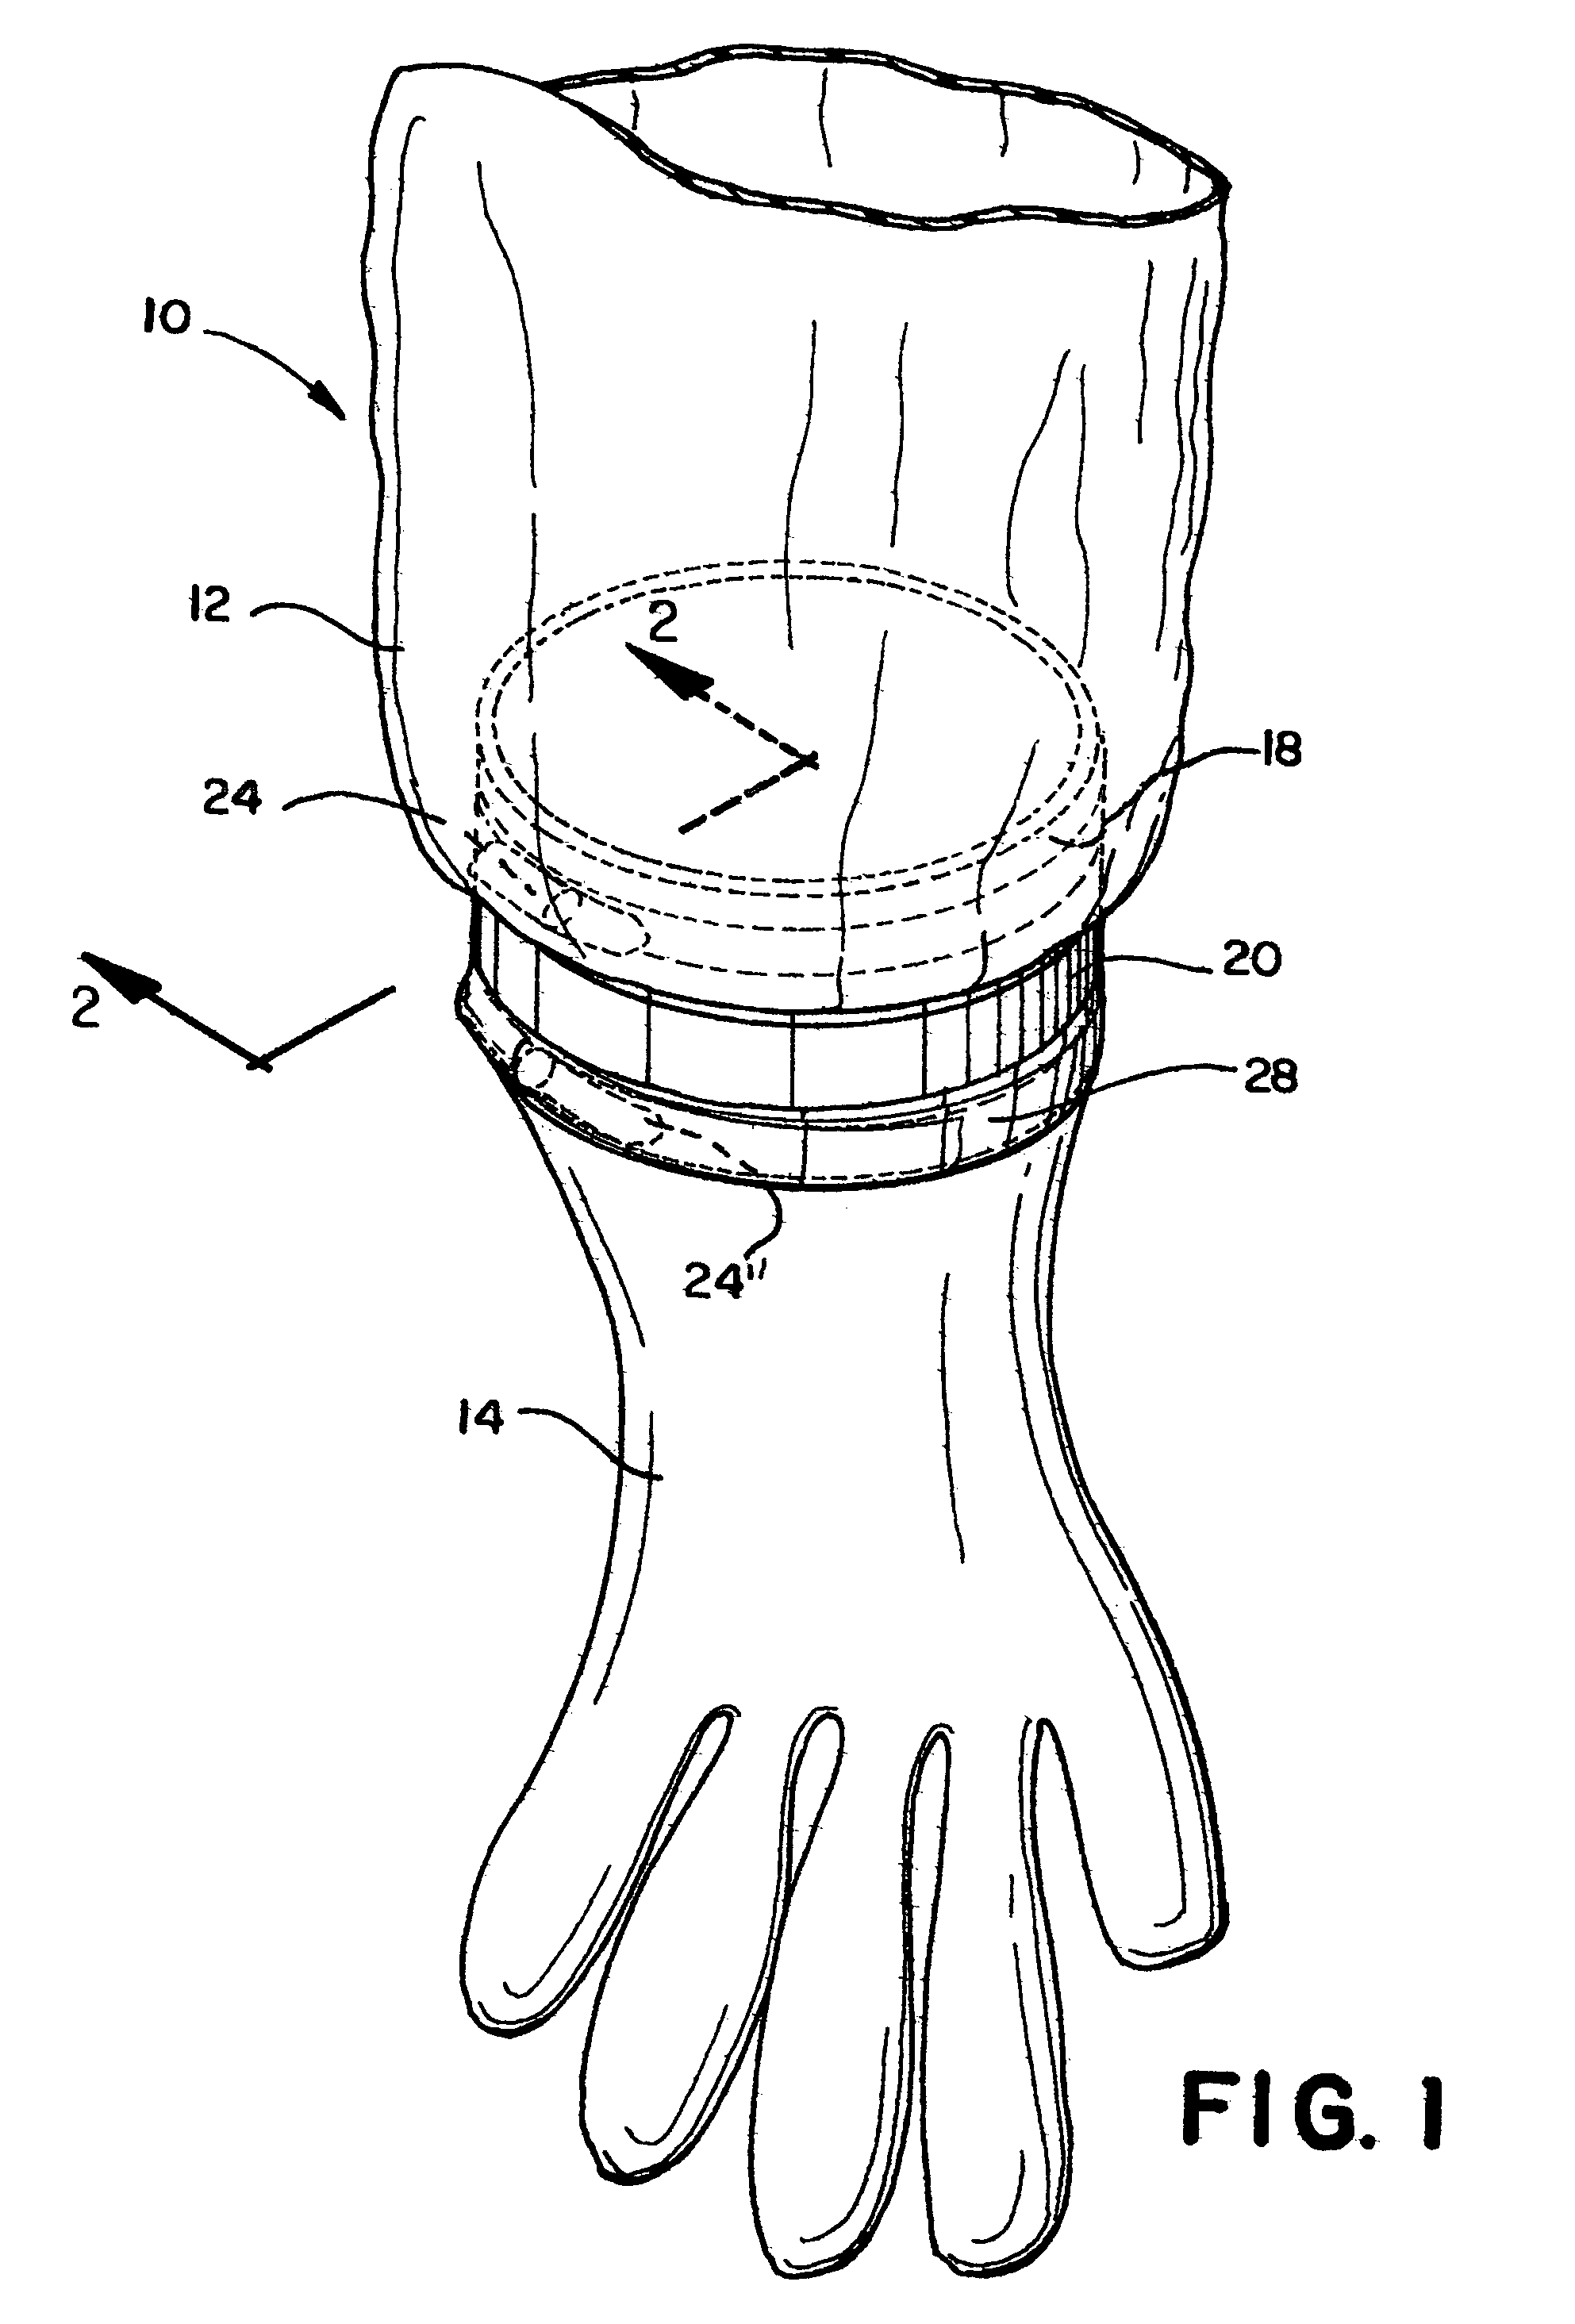 Protective garment and glove assembly